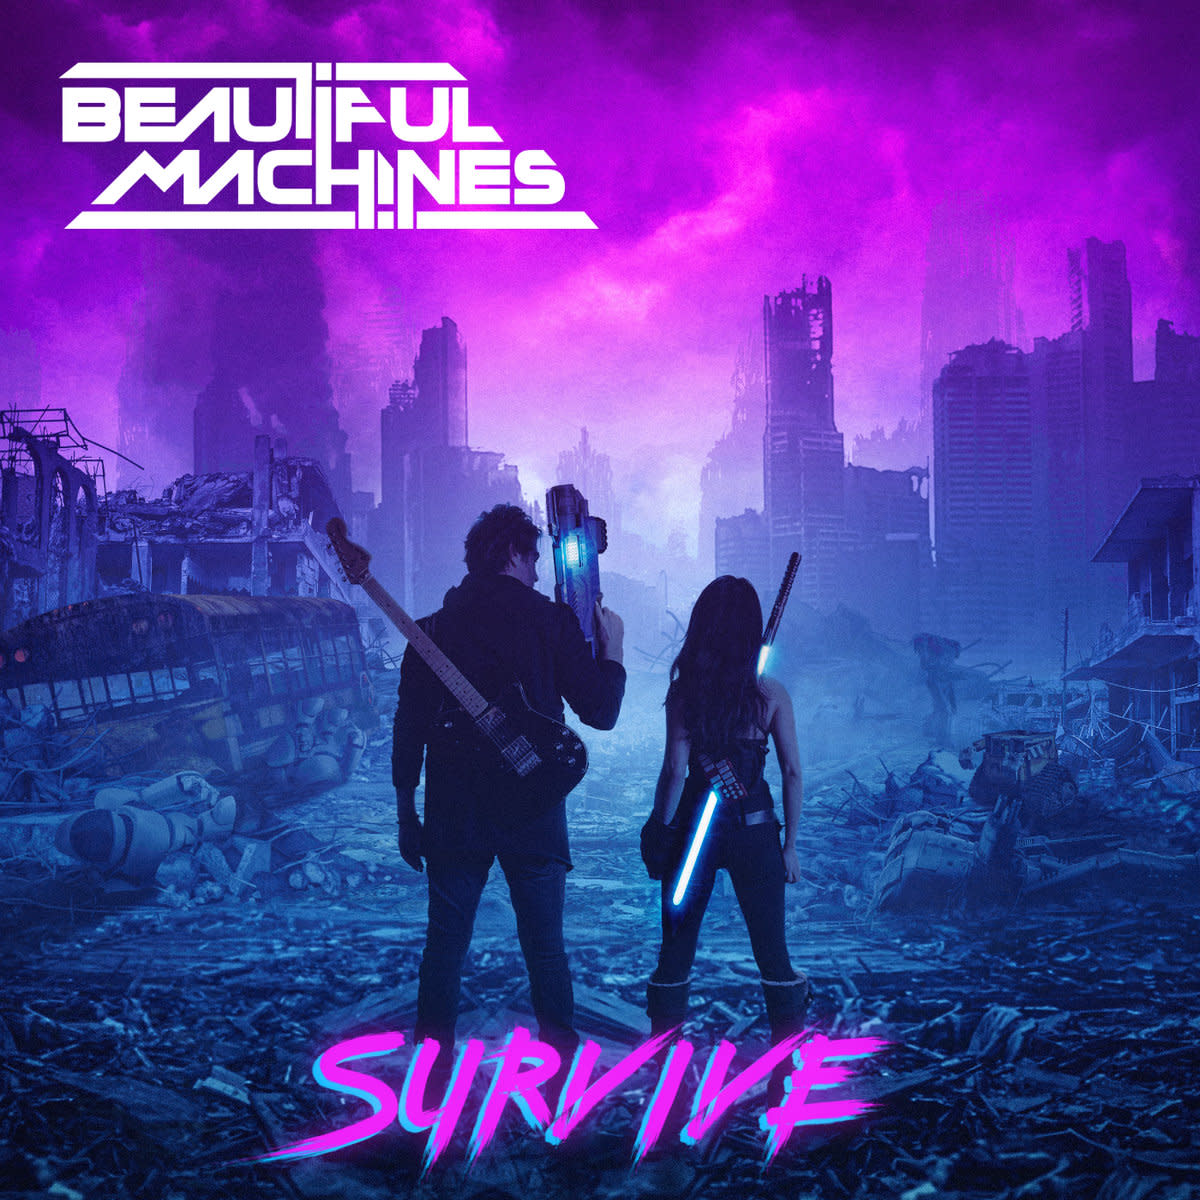 synth-single-review-survive-by-beautiful-machines